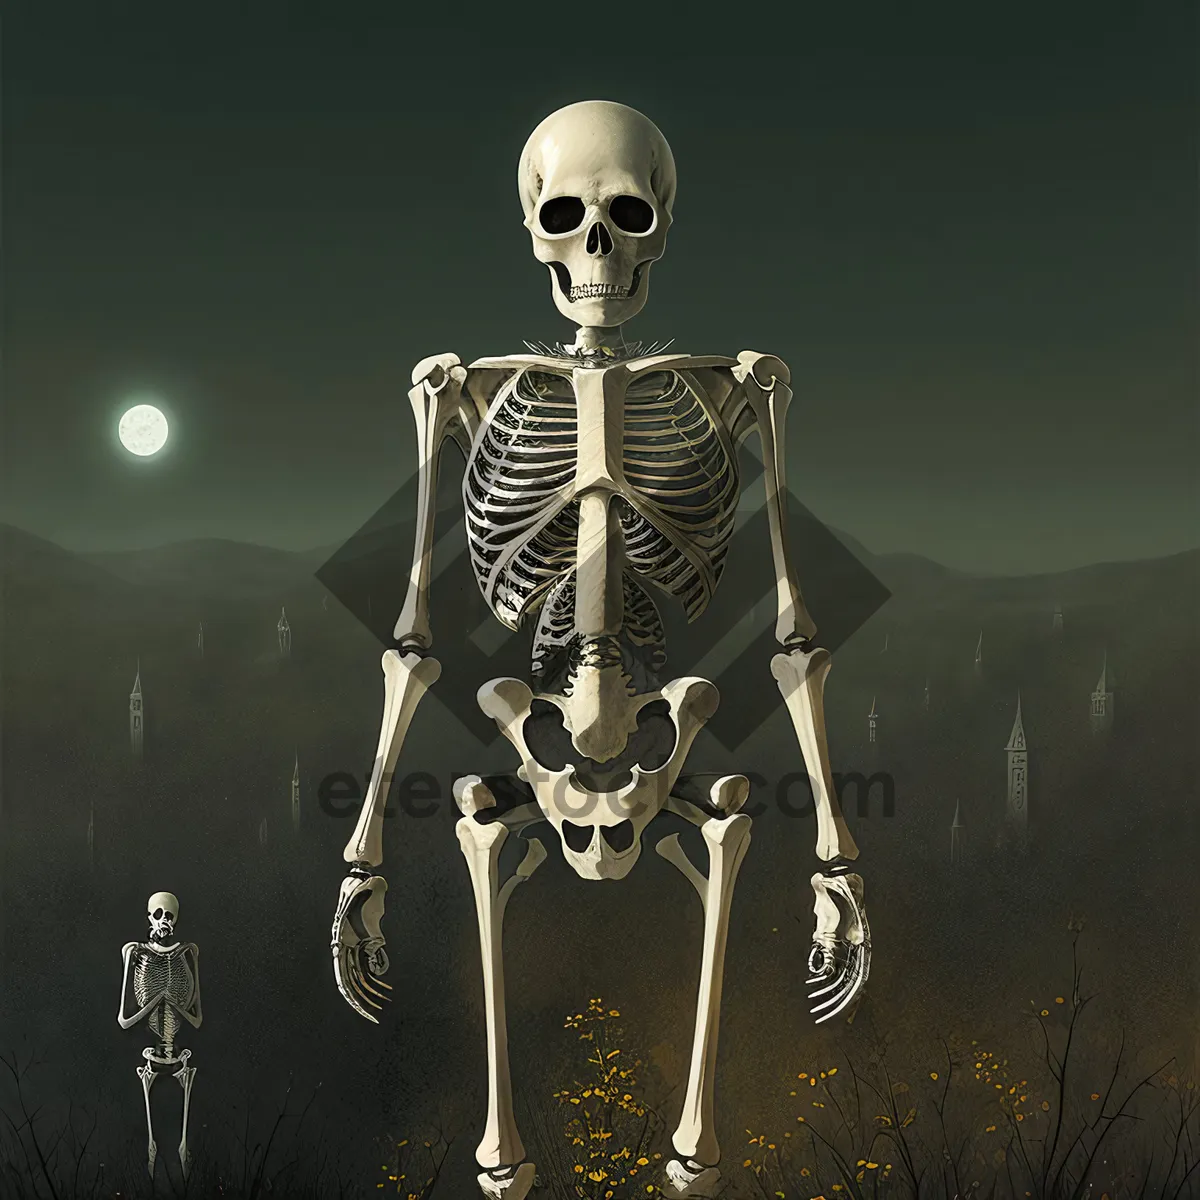 Picture of Spooky Skeleton Pose in Cemetery